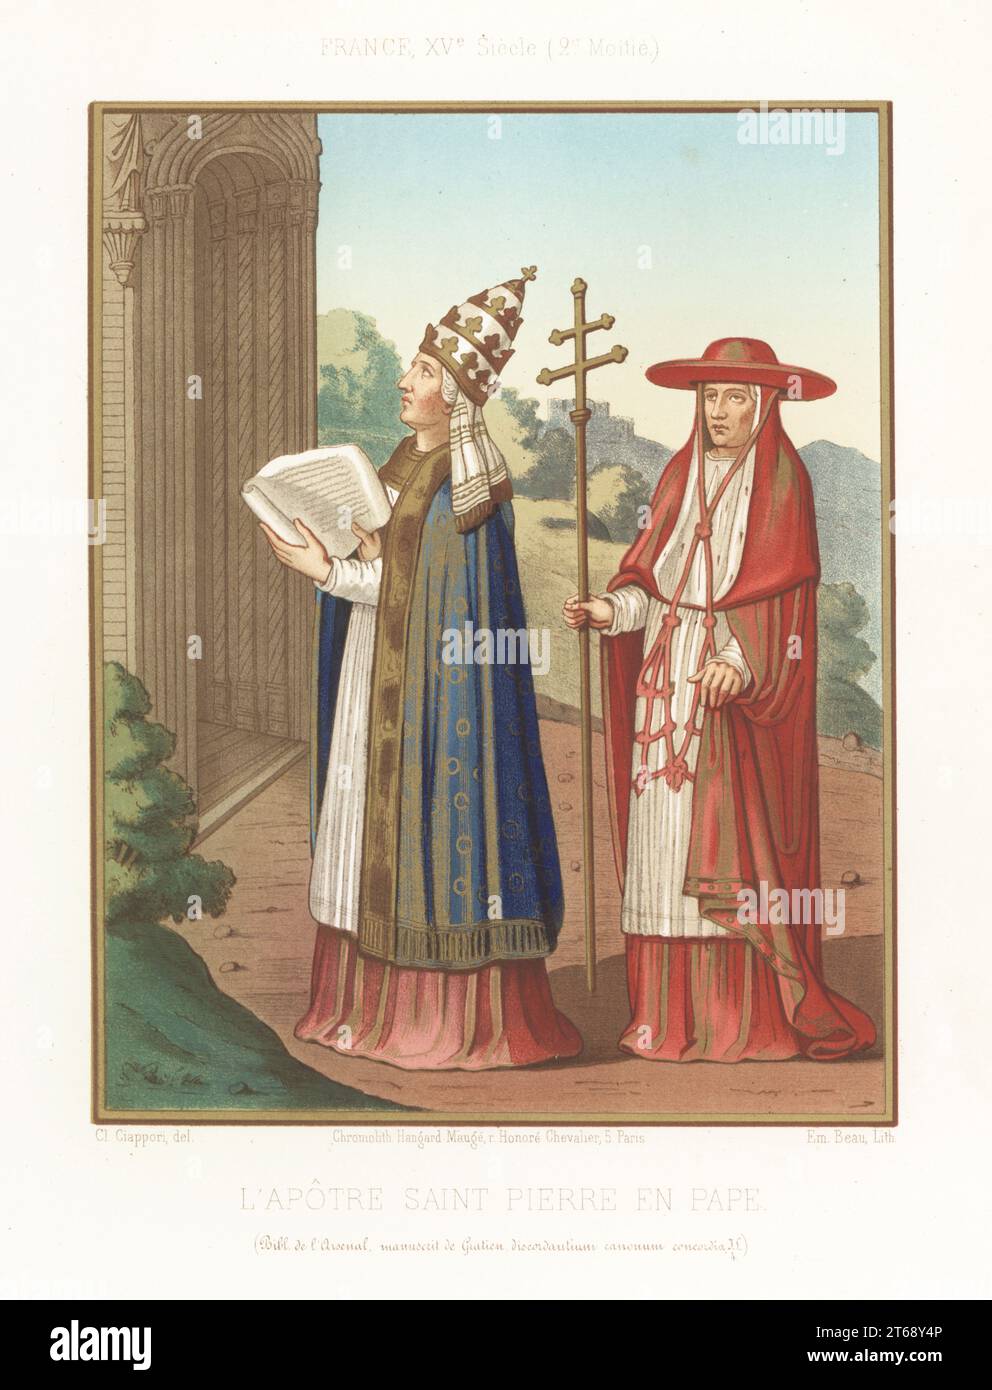 Saint Peter in the costume of a 15th century pope. In triregnum crown holding a bible, cardinal in scarlet habit and zucchetto holding a papal cross with two crossbars [sic]. L'Apotre Saint Pierre en Pape. France, XVe siecle. Taken from Gratian's Decretum, MS JL4, Bibliotheque de l'Arsenal. Chromolithograph by Emile Beau after an illustration by Claudius Joseph Ciappori from Charles Louandres Les Arts Somptuaires, The Sumptuary Arts, Hangard-Mauge, Paris, 1858. Stock Photo